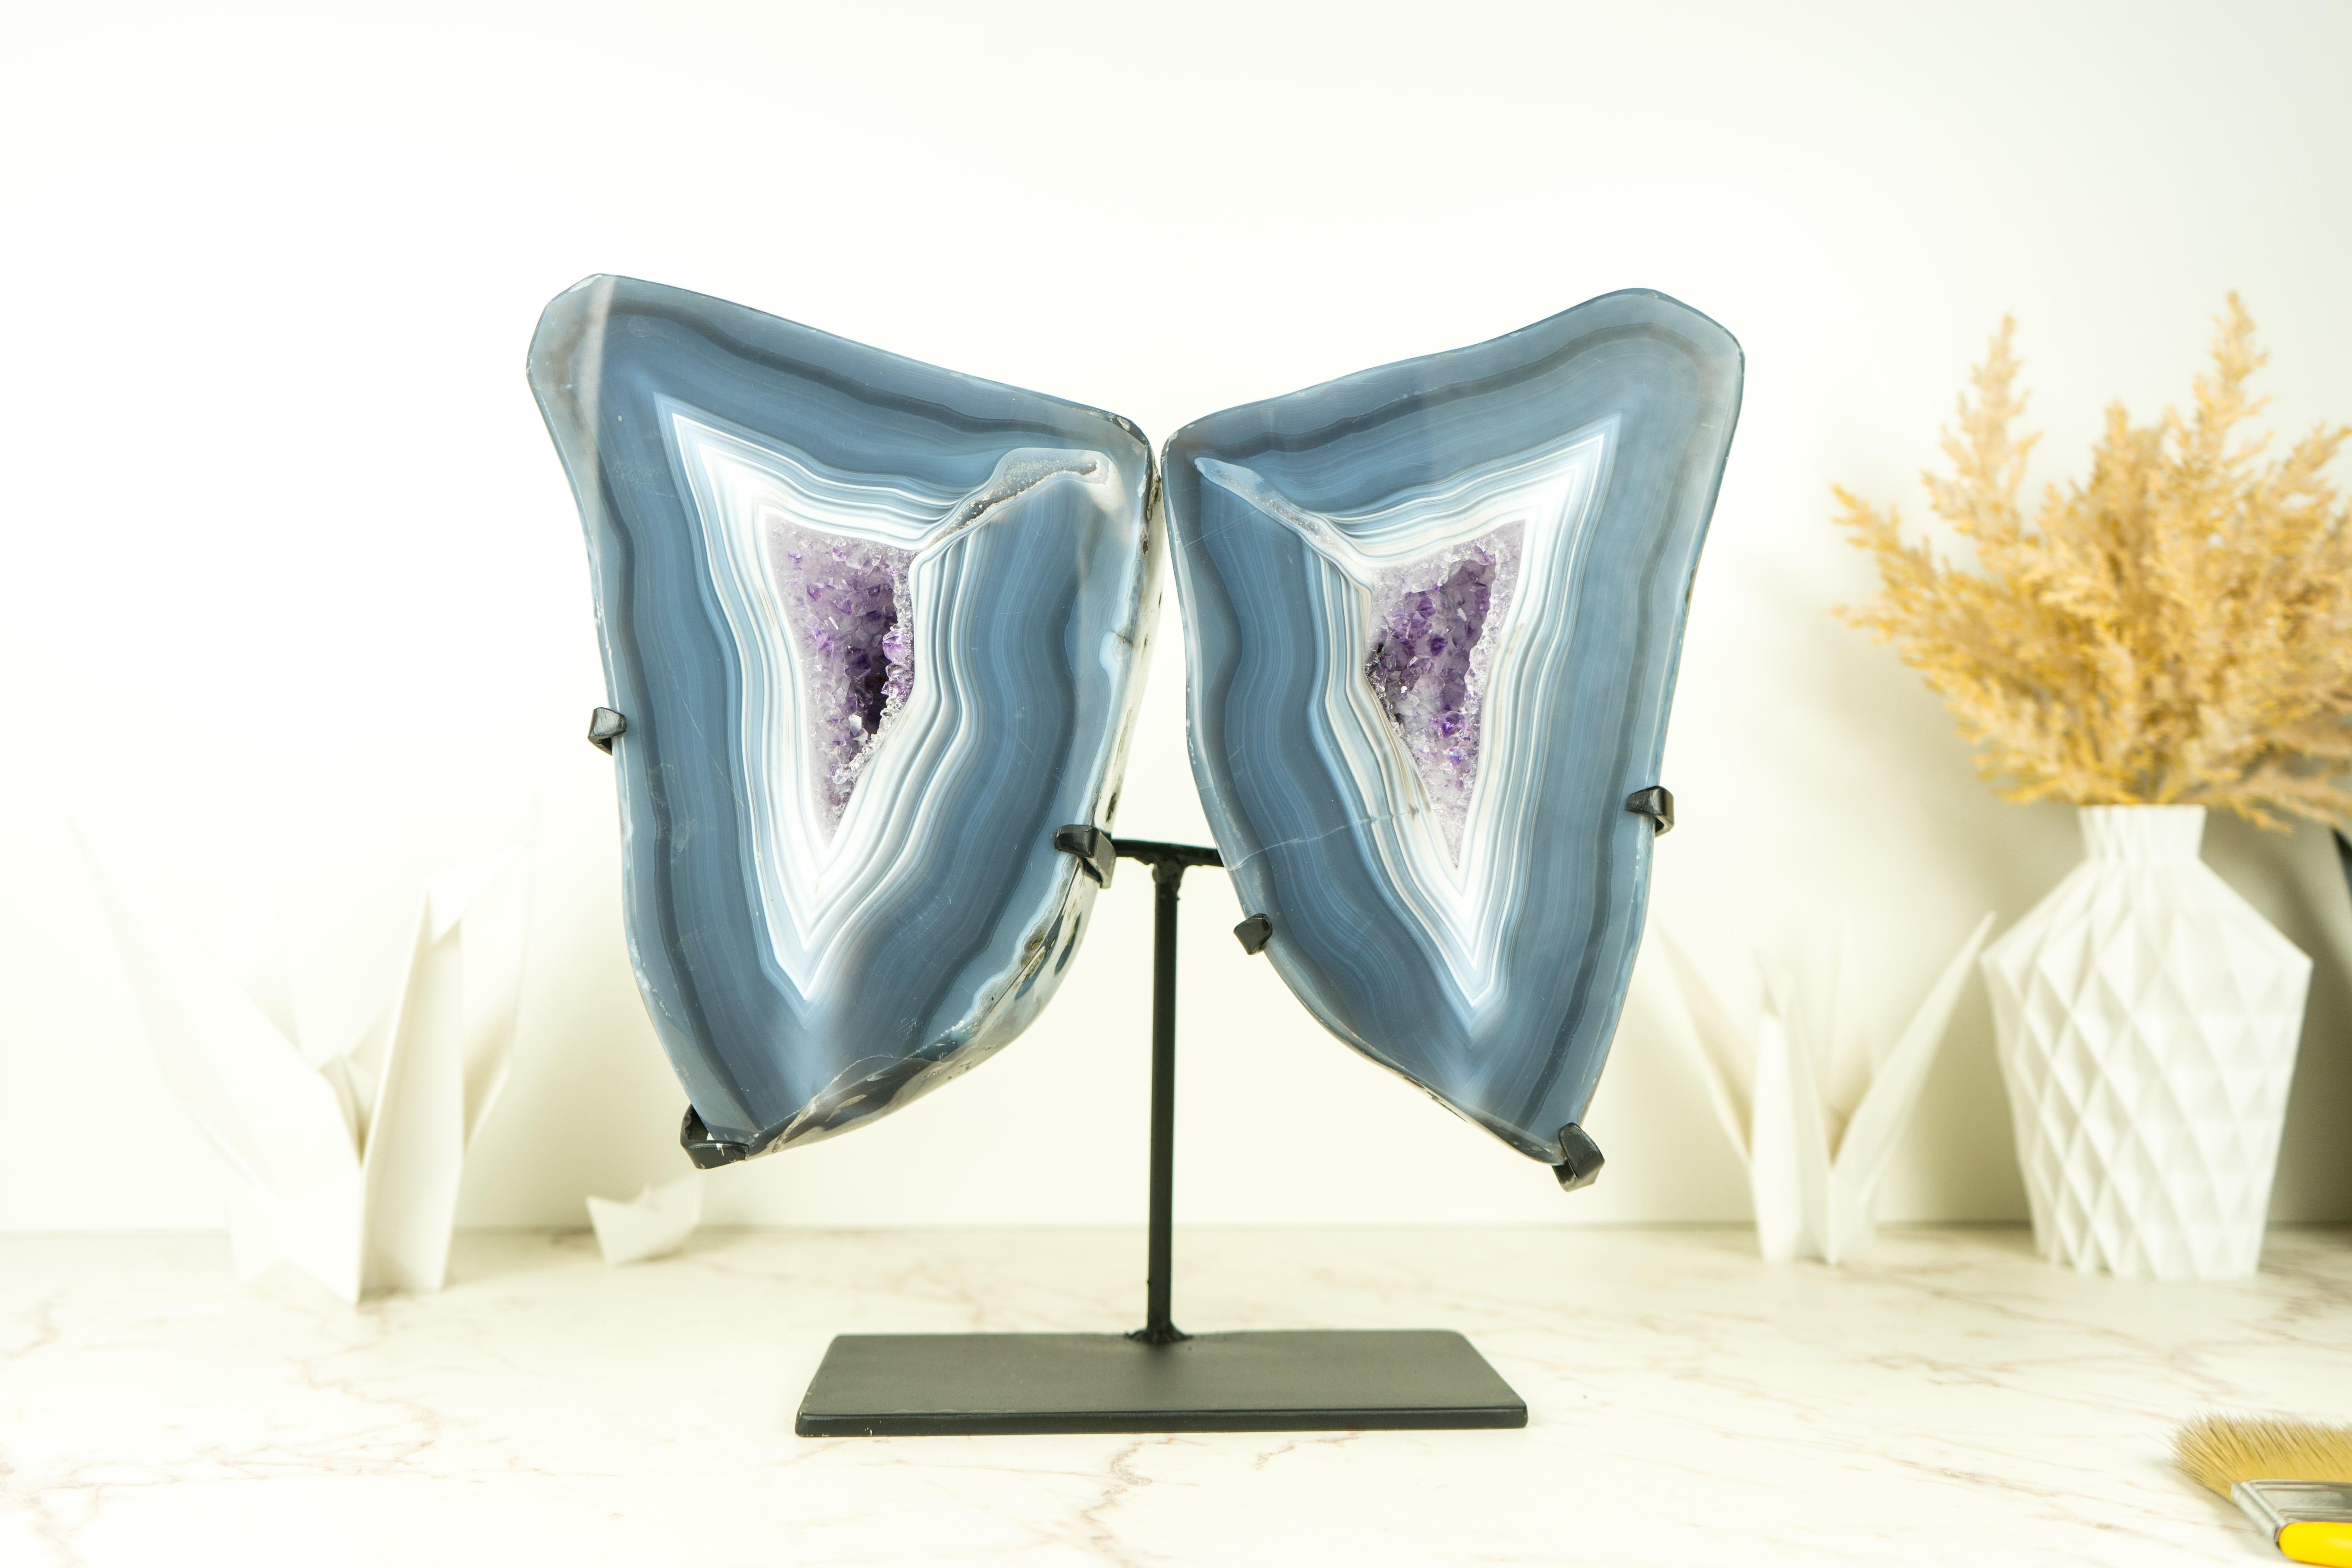 A fascinating agate geode that was cut open to show the world its internal beauty, this Agate Geode Wings combines world-class blue lace agate, purple amethyst druzy, and careful craftsmanship to become this spectacular natural artwork. Exceptional